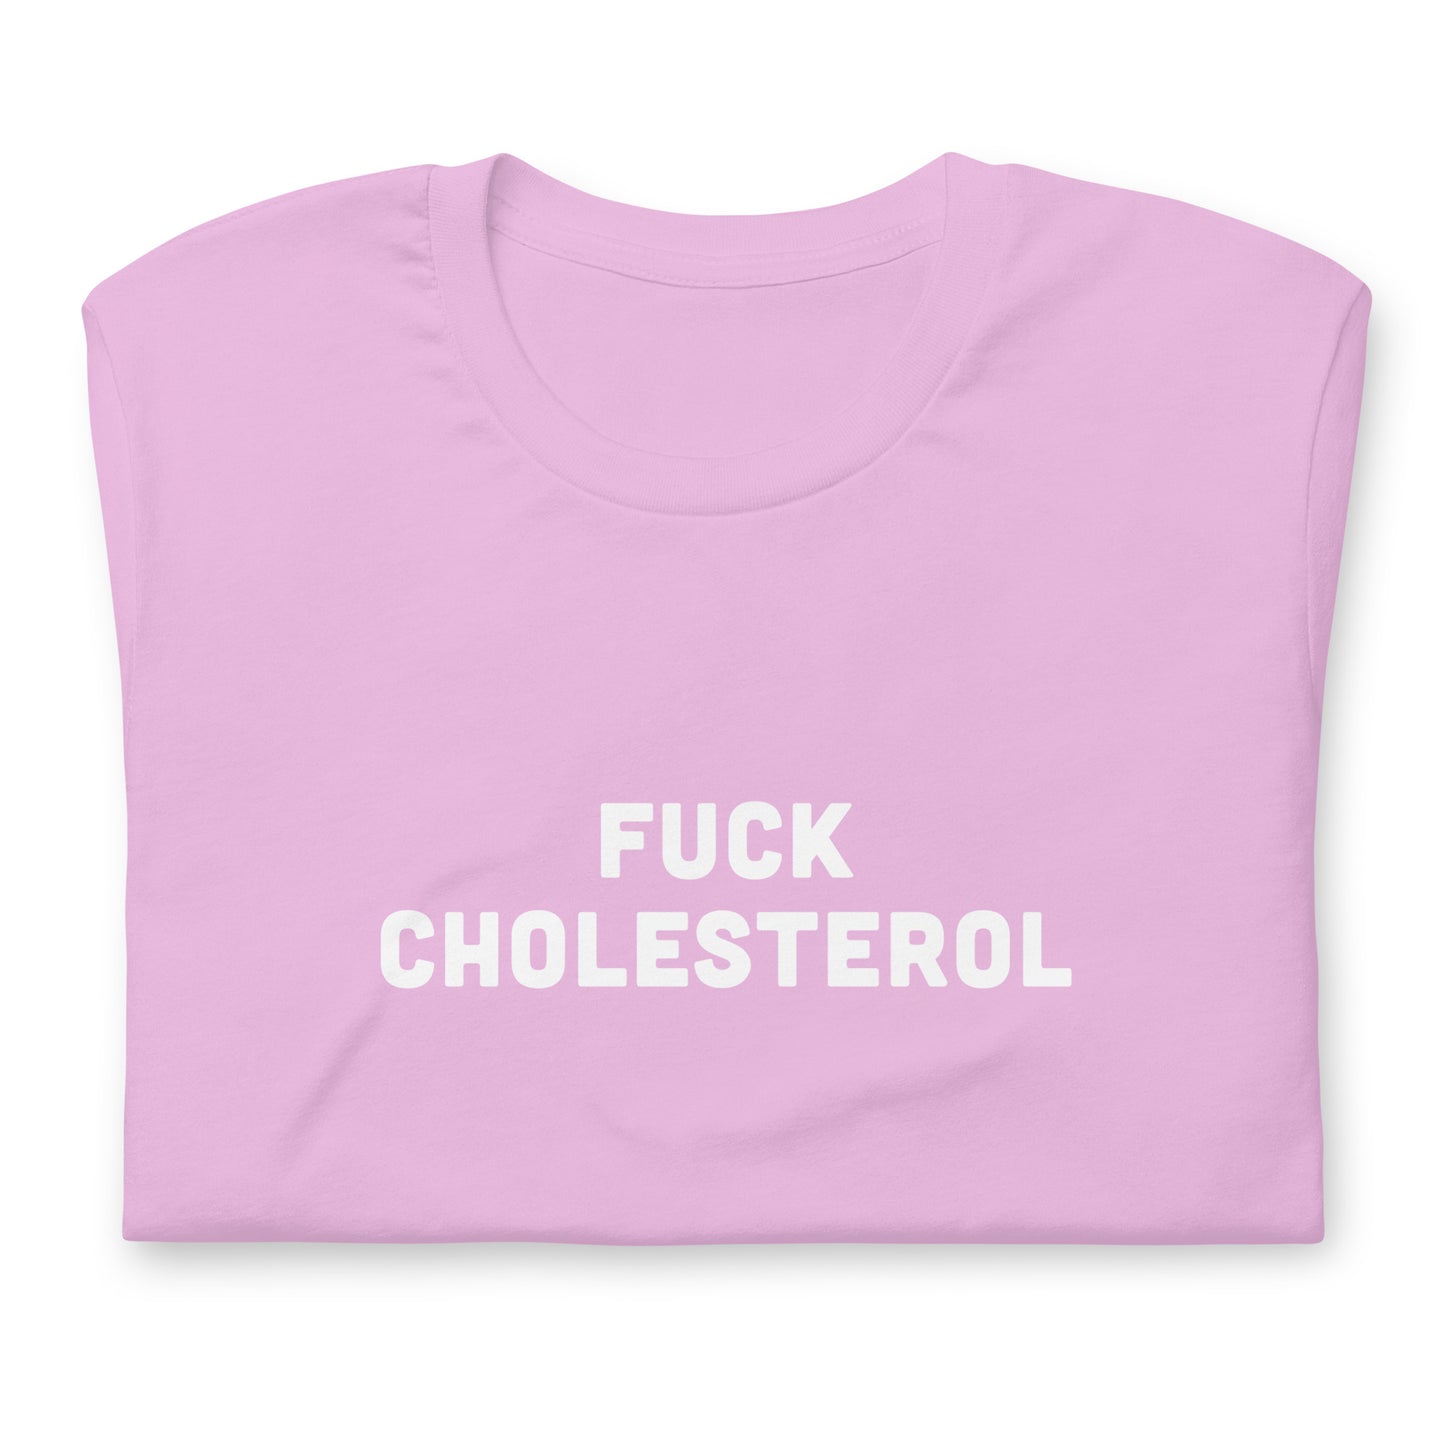 Fuck Cholesterol T-Shirt Size 2XL Color Forest